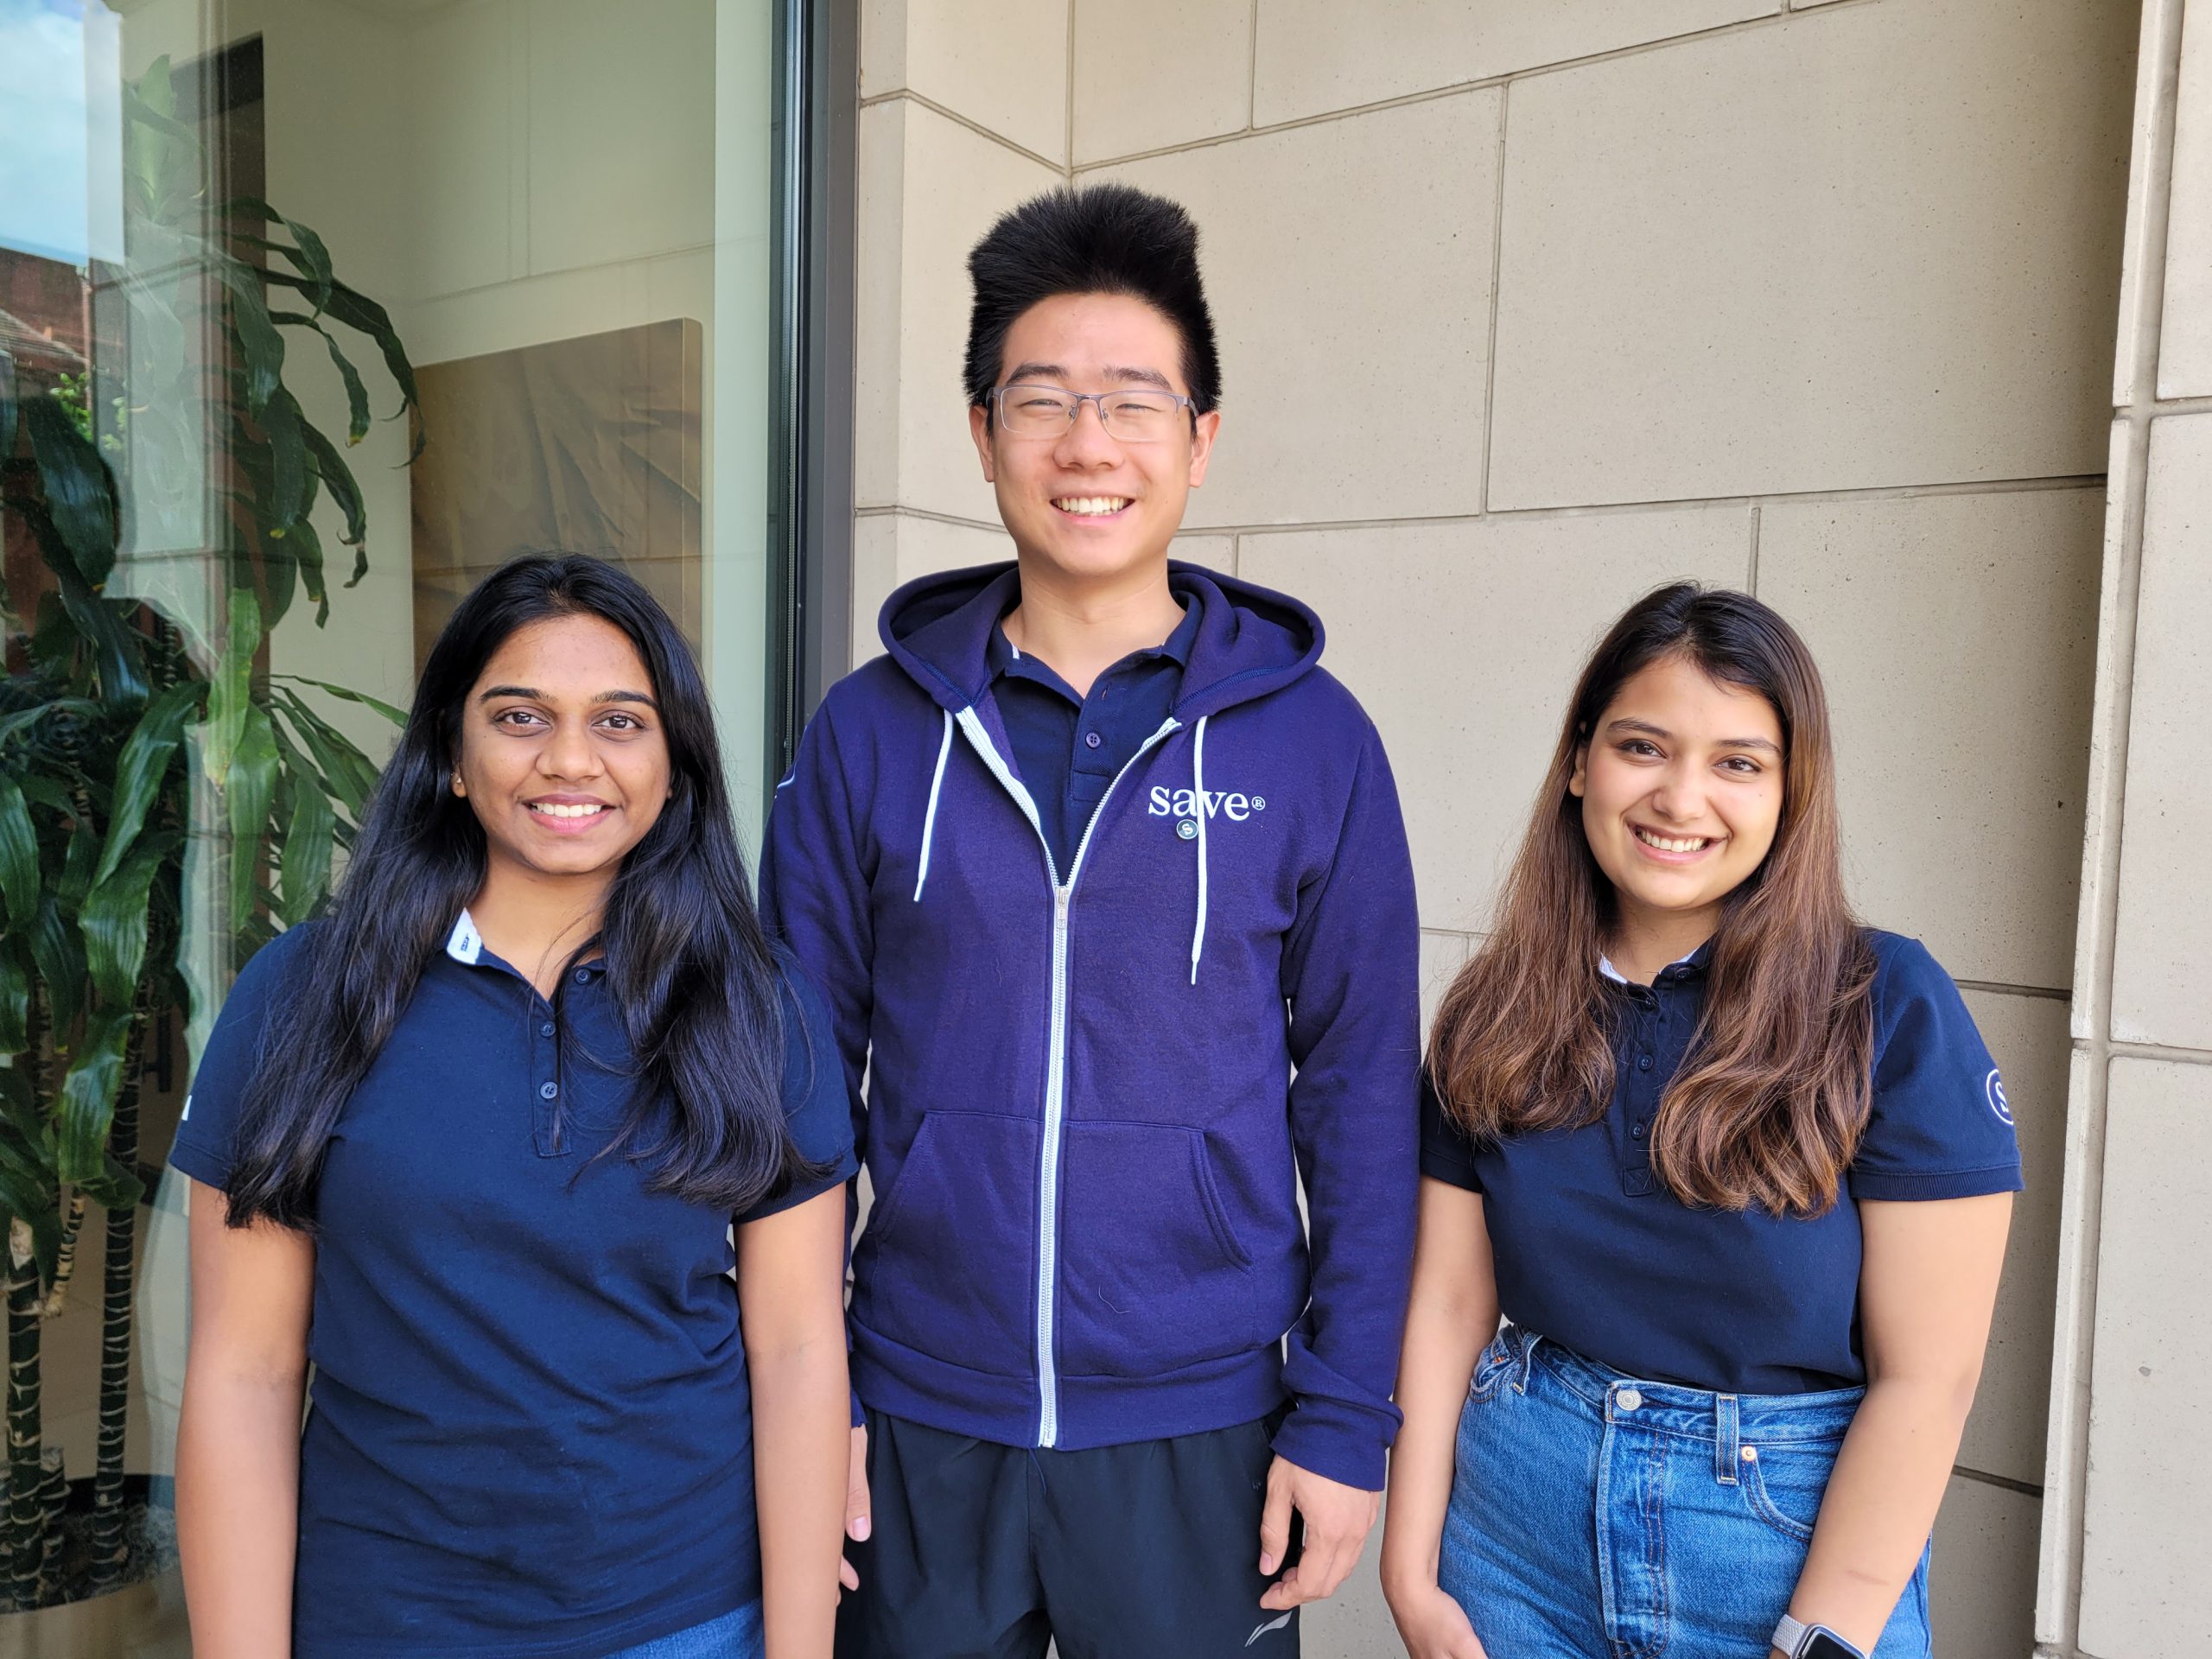 Save is proud to welcome Rice University’s Durga Parulekar, Yifei Ren, and Anusha Muddapati to our development team.